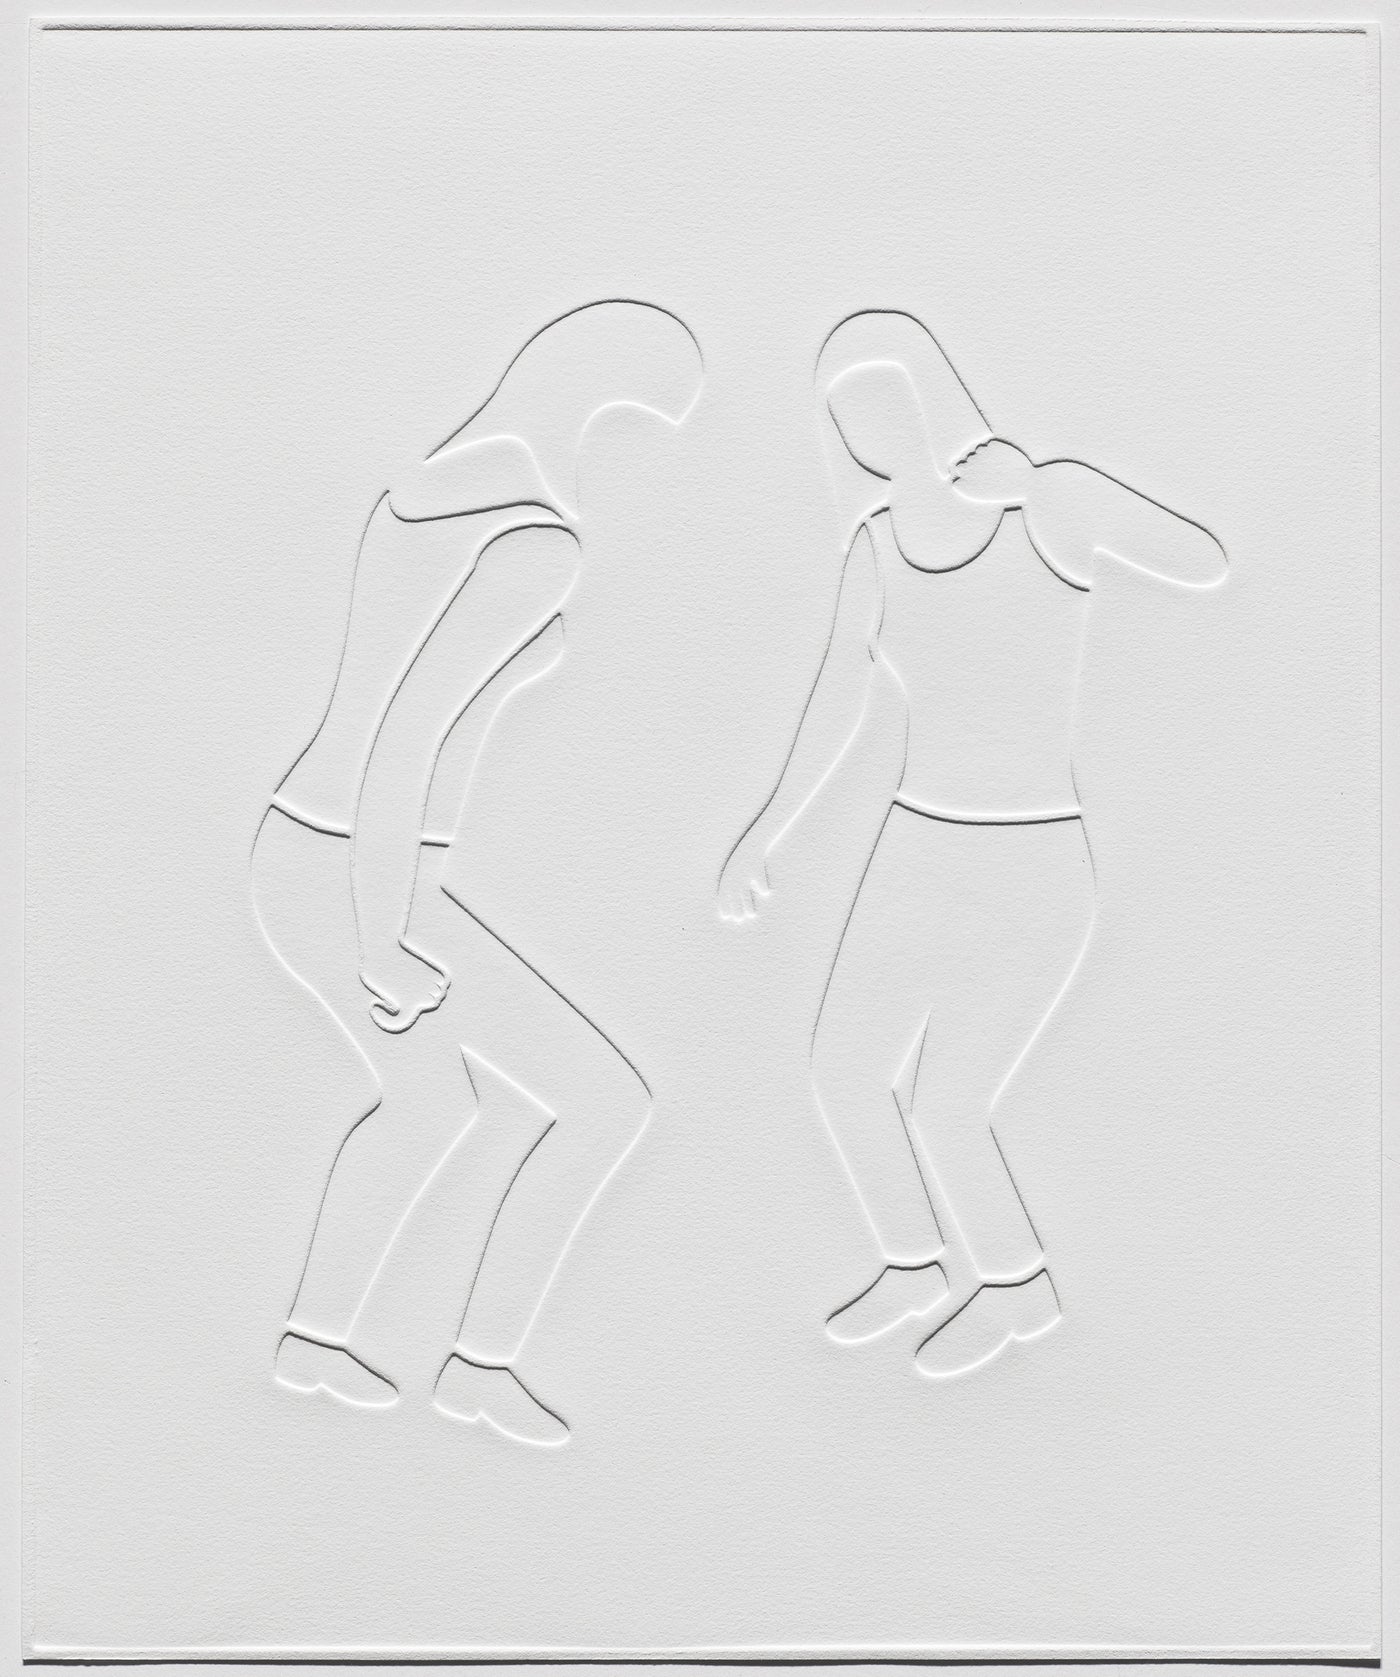 "Two Dance Tank Tops" 16 7/8 x 13 13/16”, debossed relief print on BFK Rives white 280gsm, 2022